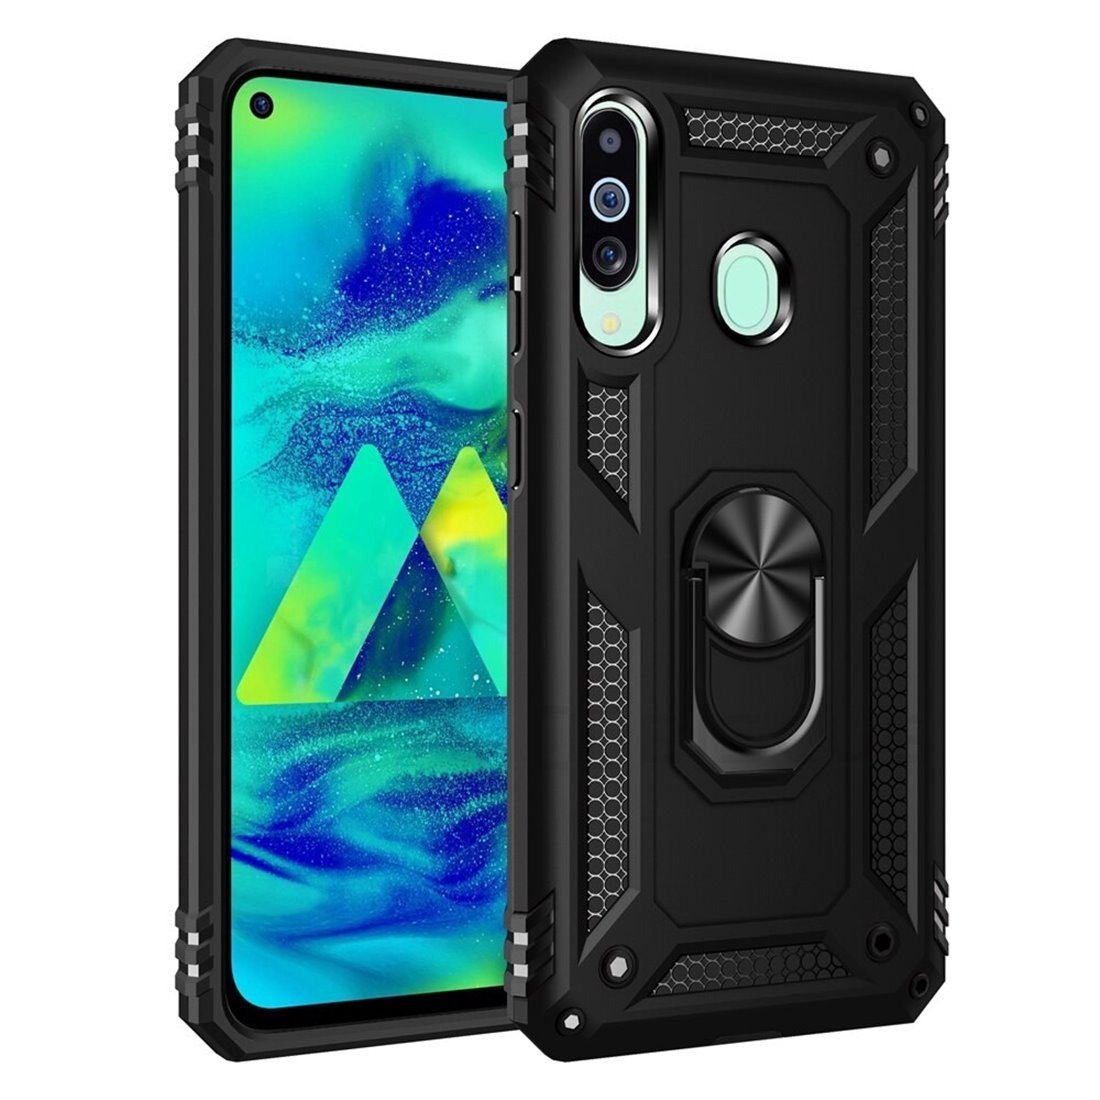 Samsung Galaxy A60 Plastic Black Back Cover - Solid ring